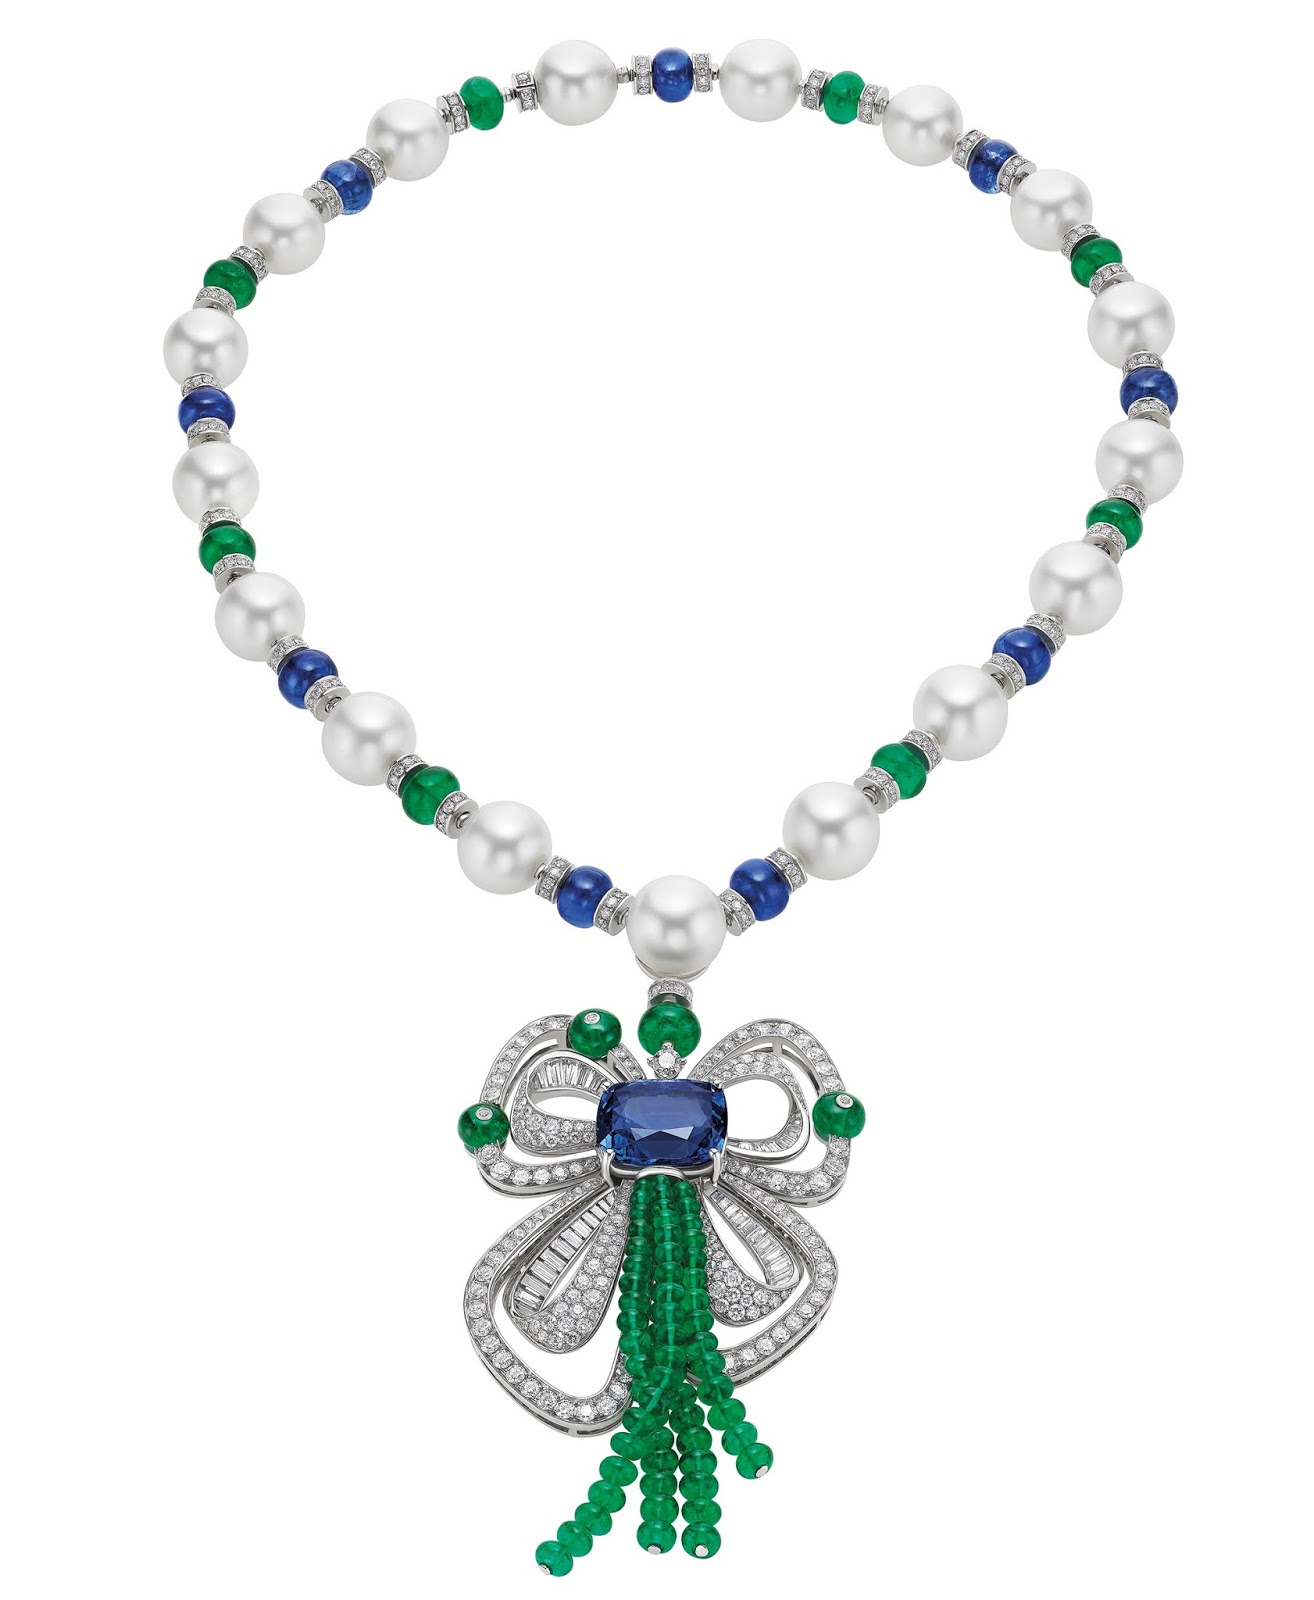 Bulgari Goes Bold With High Jewelry Collection – WWD